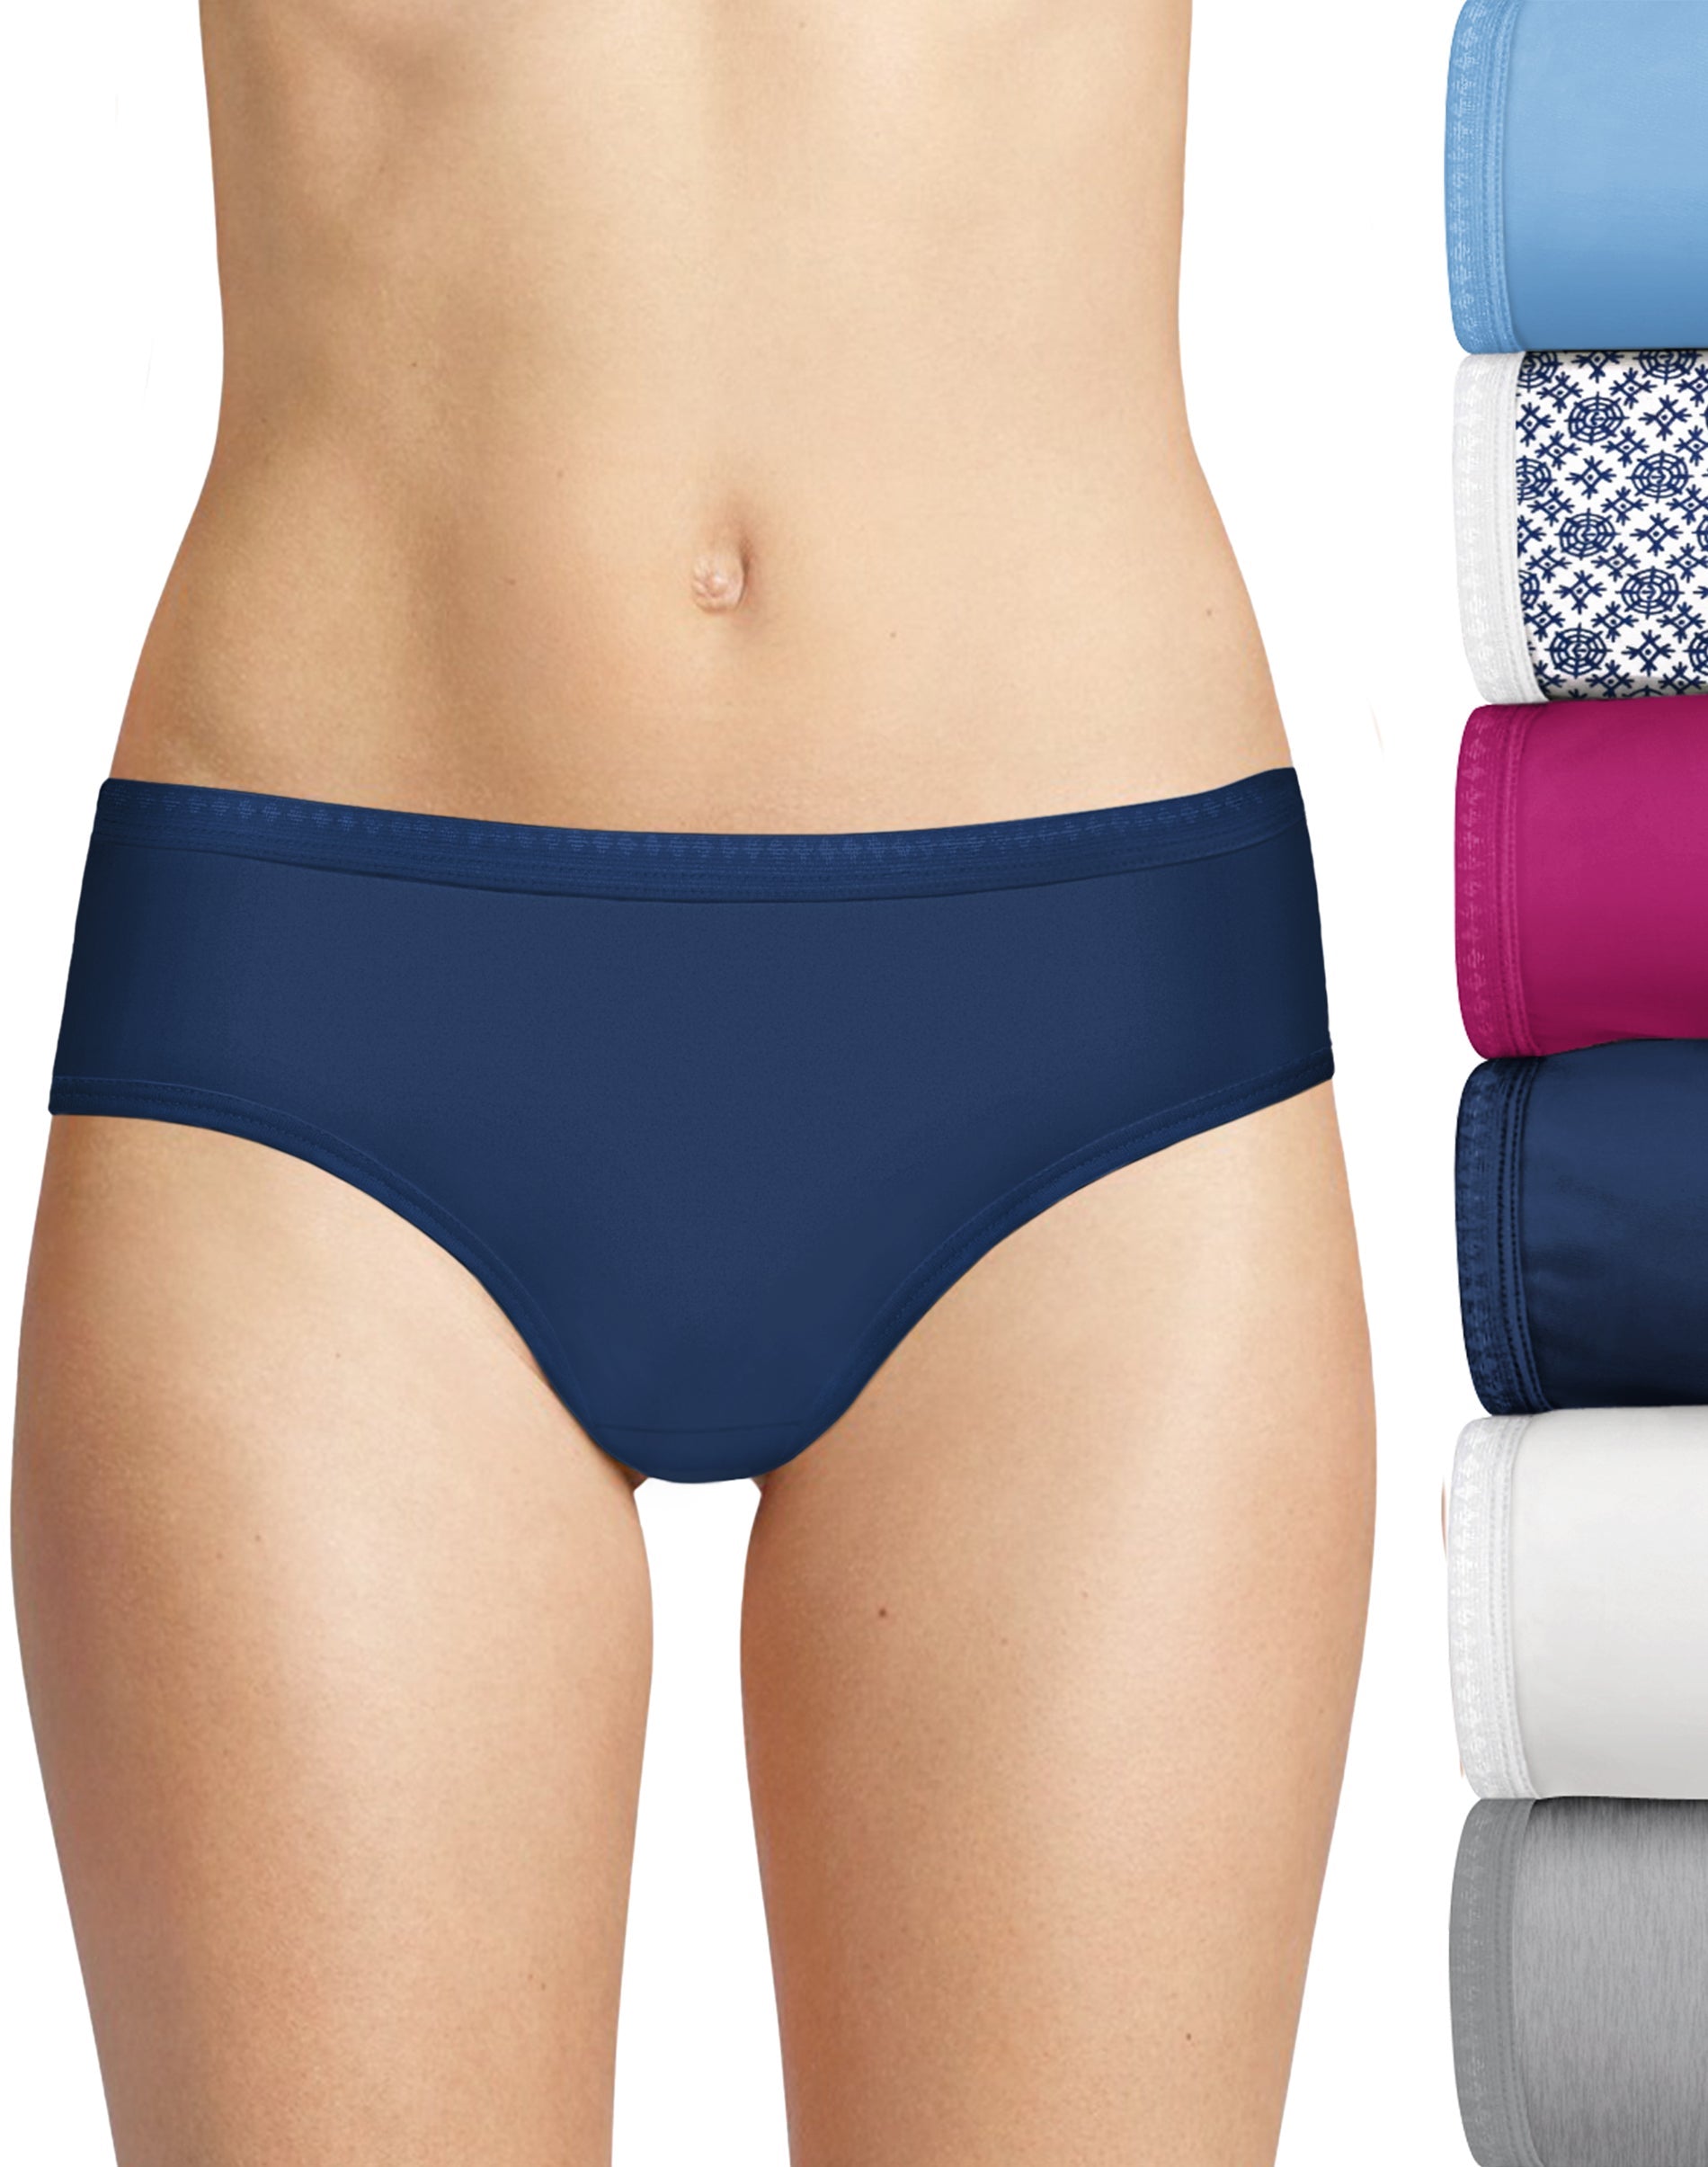 Women's Breathable Cotton Hipster Underwear,4 Pack 